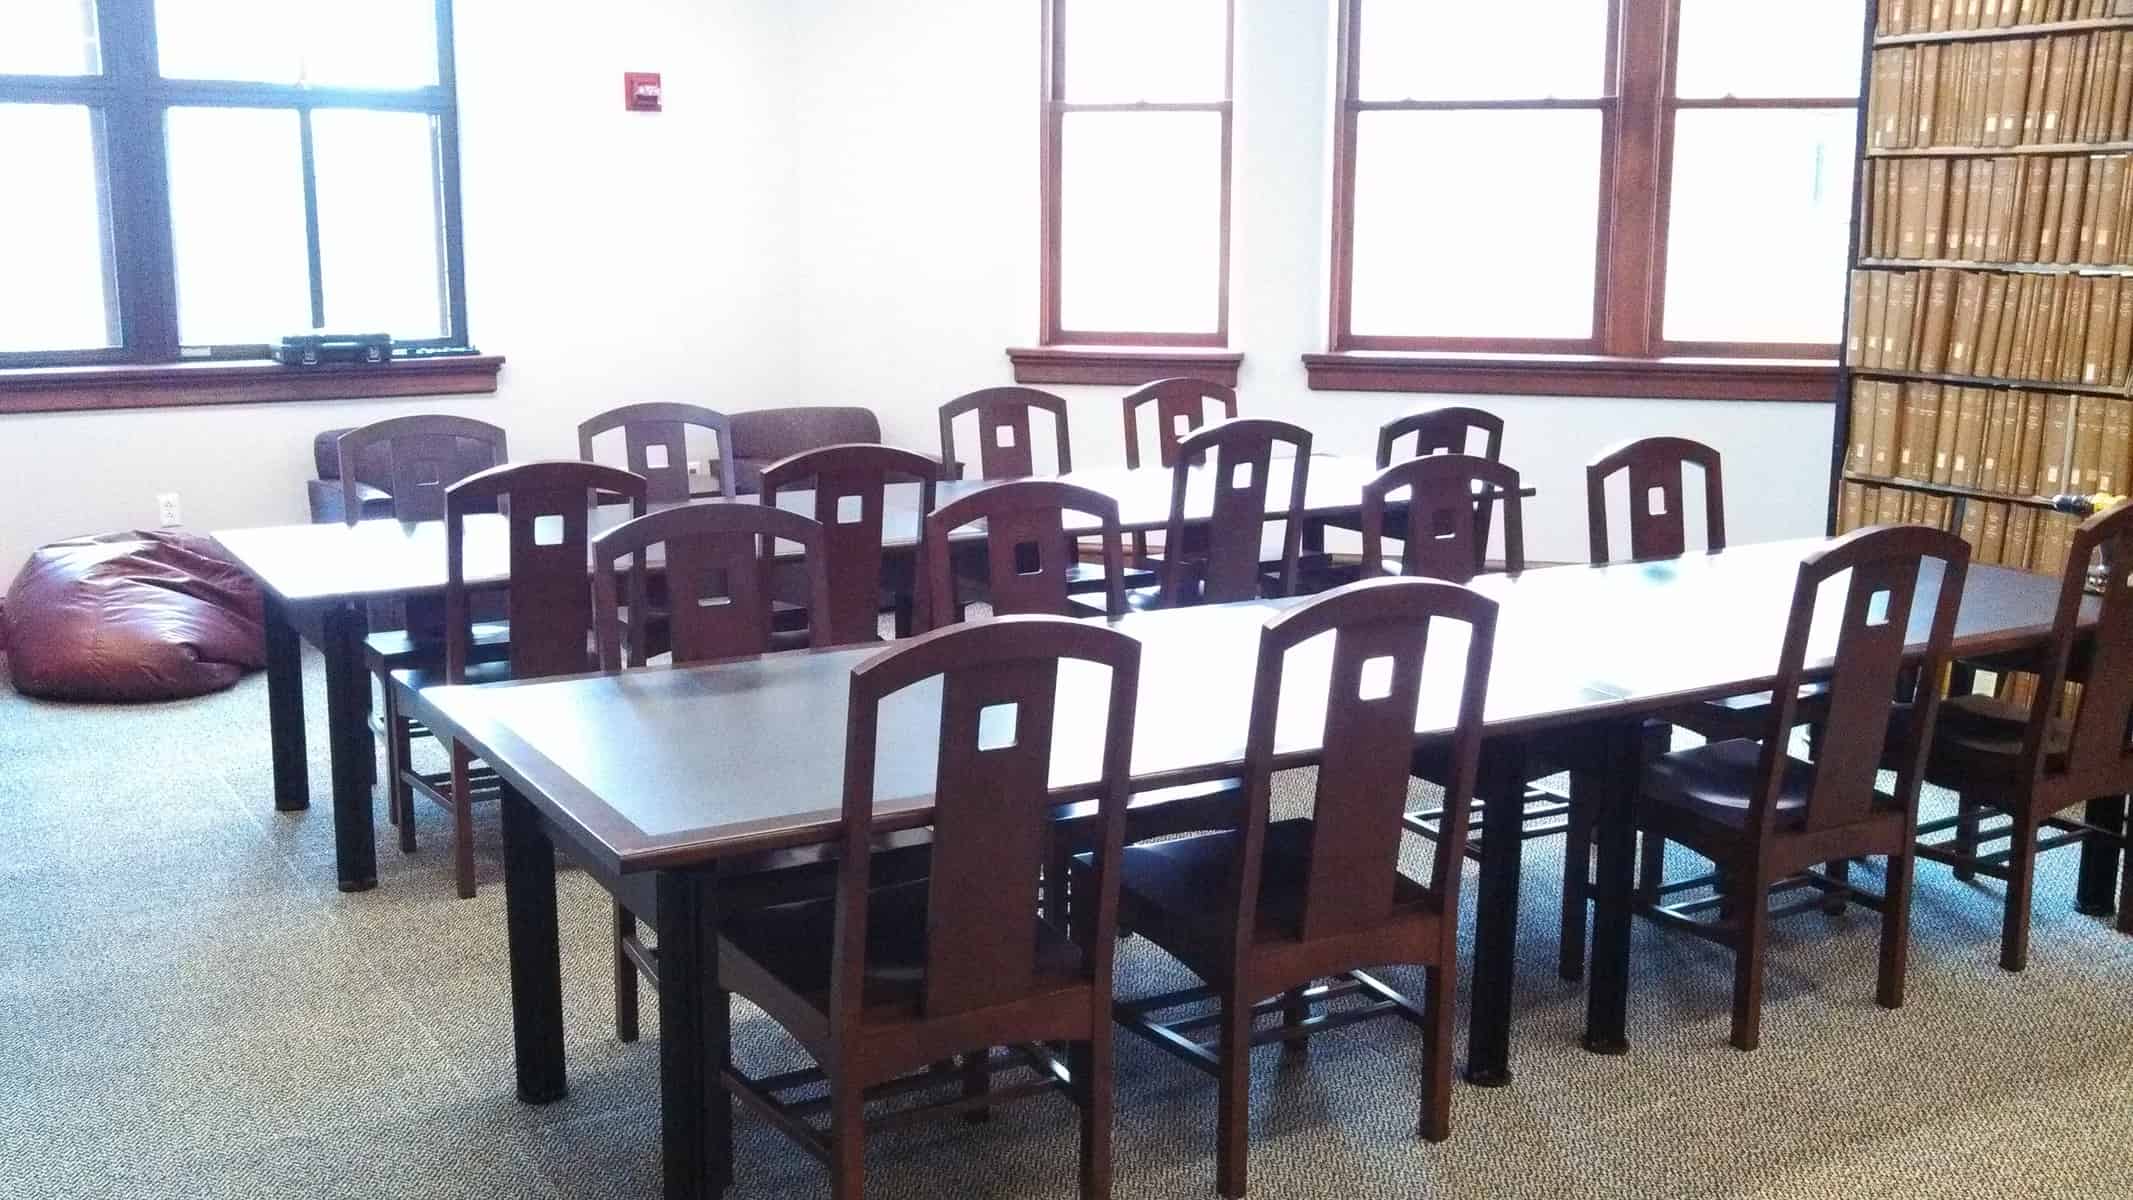 New group study area